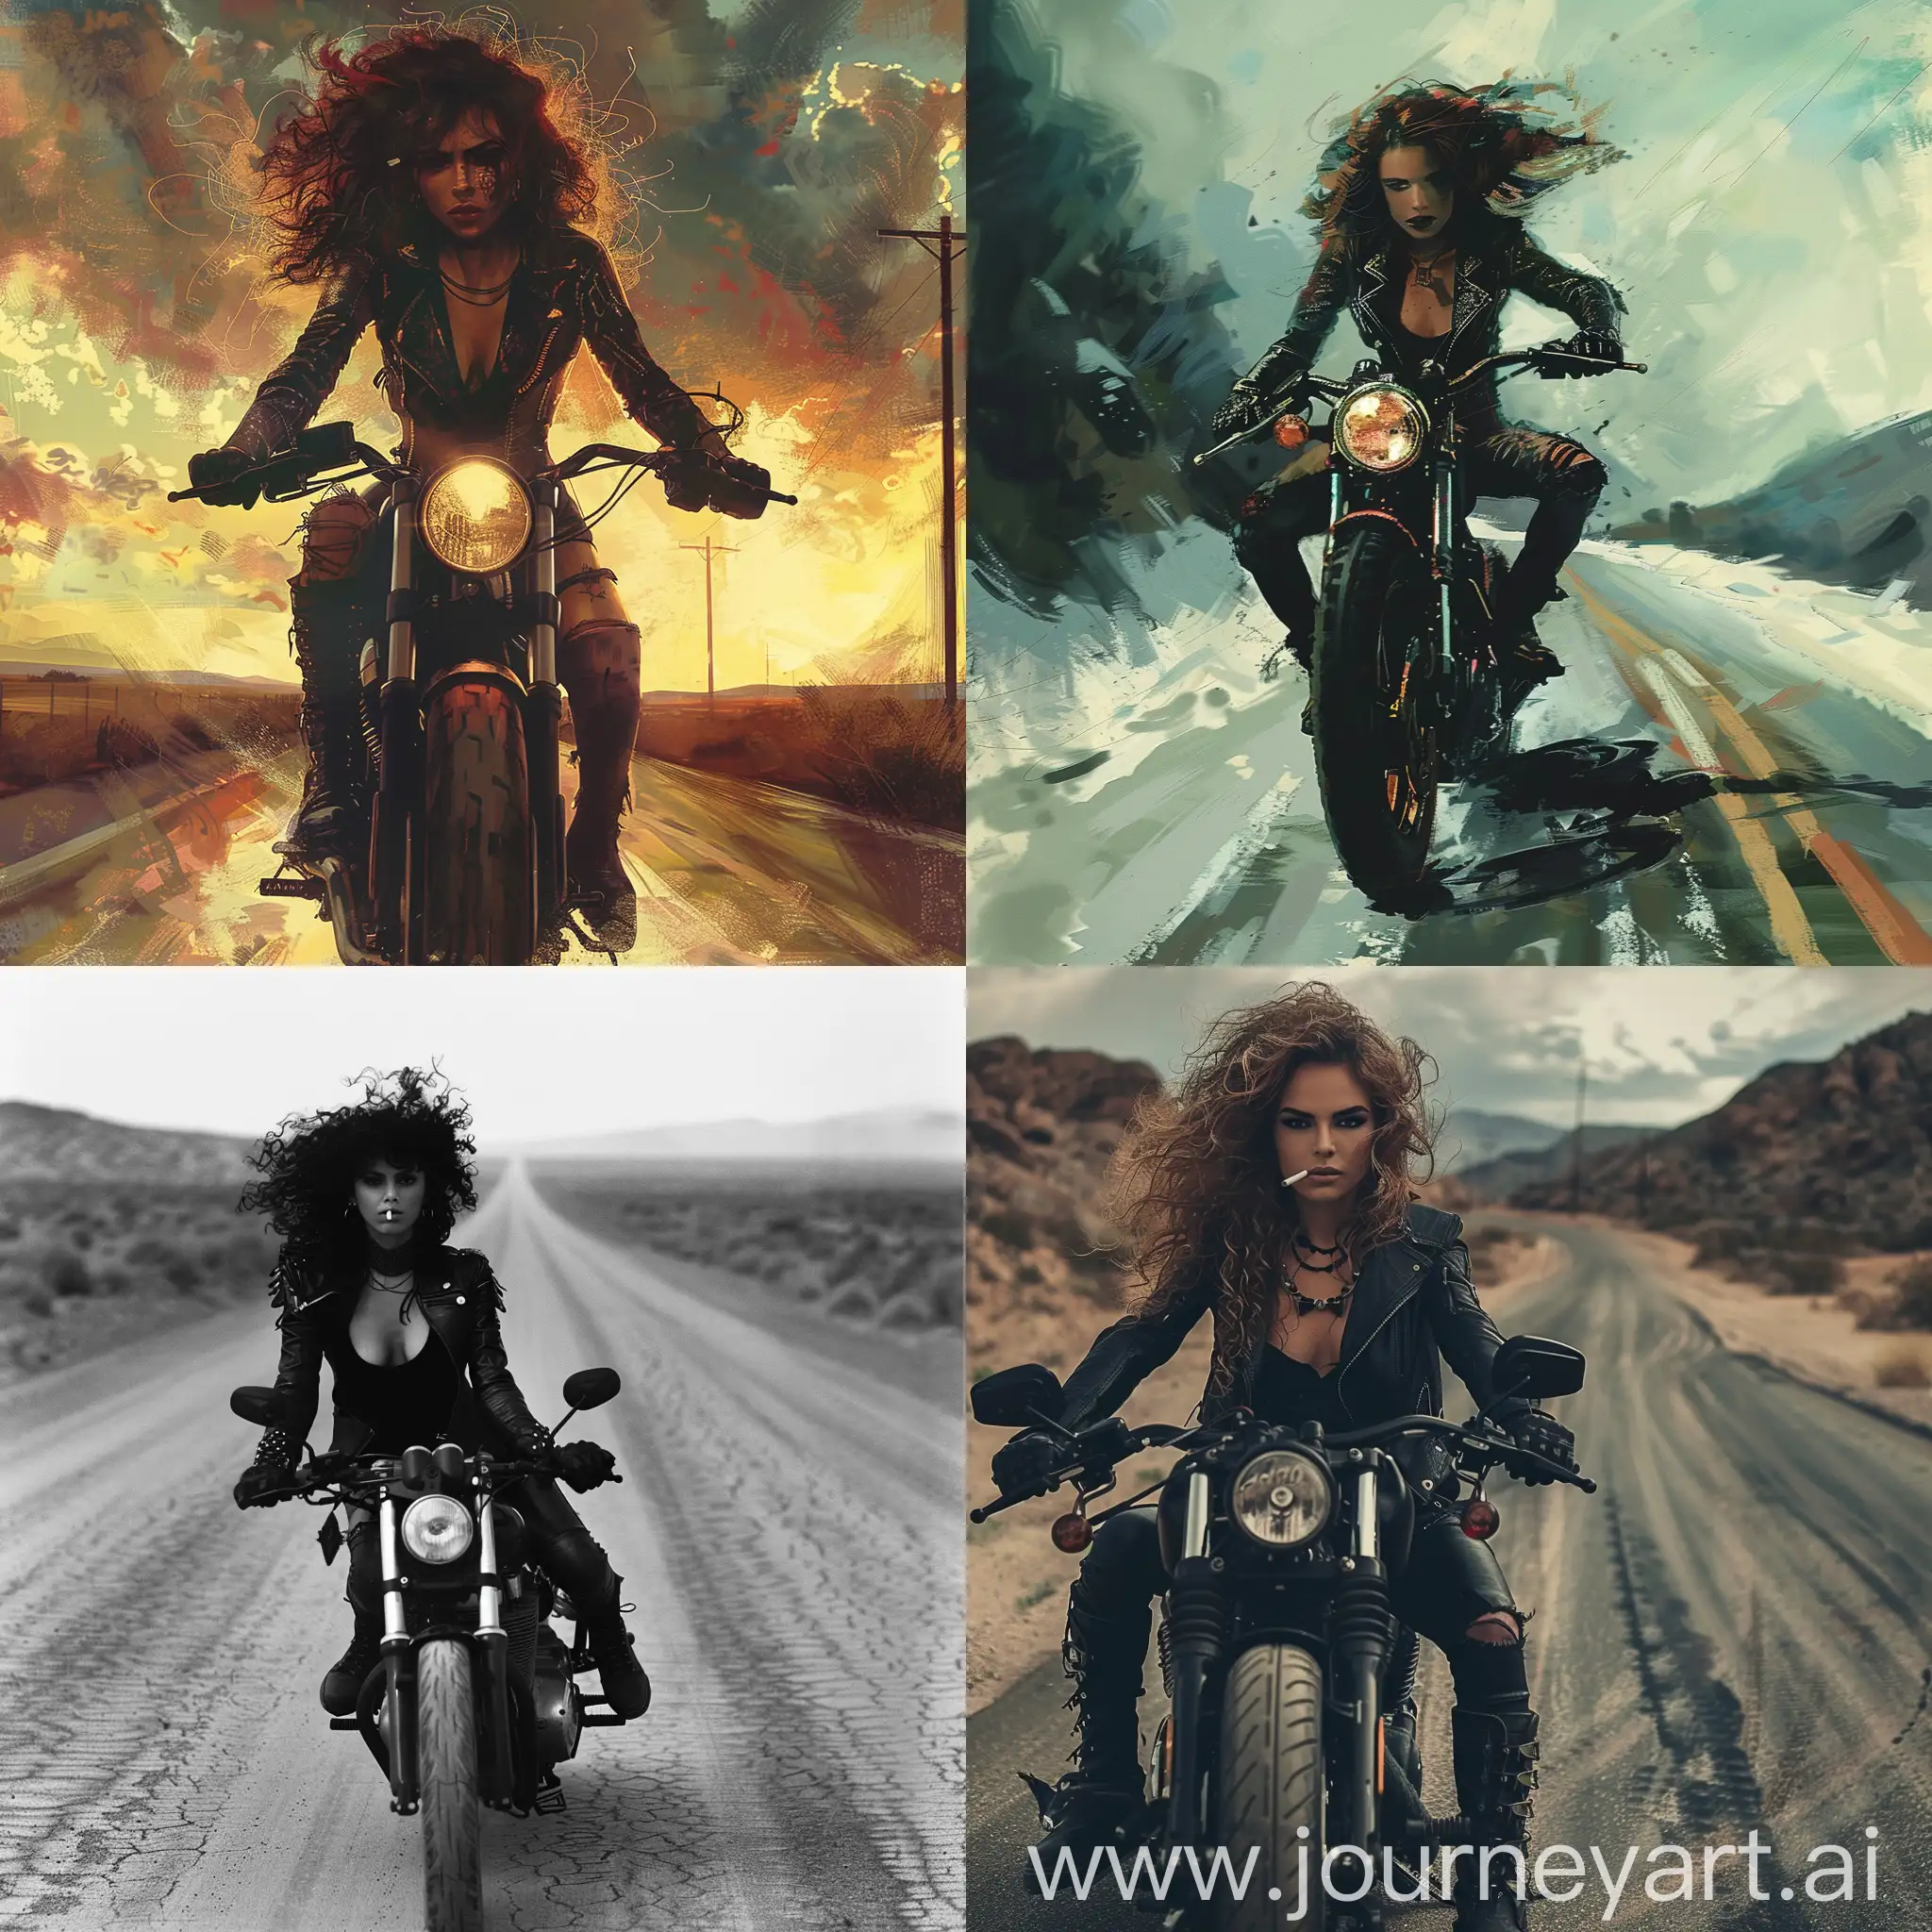 A motorcyclist comes down the deserted road of Darah Barun
Bony and angular face, curly hair with a black dress, which has a leather jacket, black slash pants and black long boots.
Ride a heavy motorcycle
And a cigarette in the corner of his mouth
